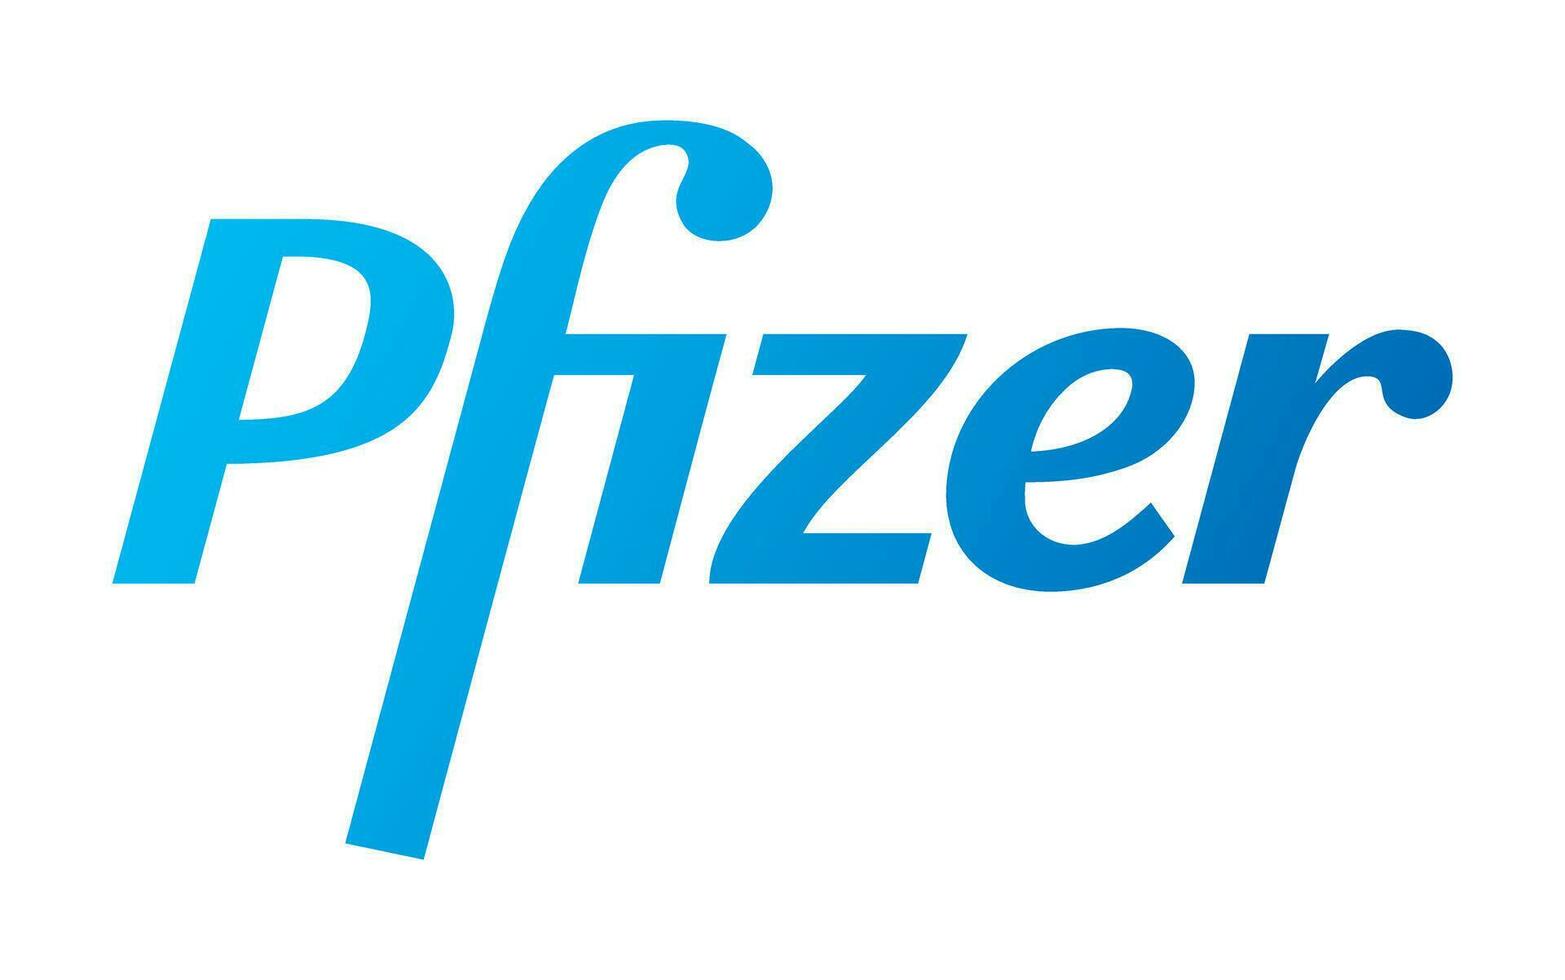 Pfizer Vector Logo - Latest Blue Color - American pharmaceutical corporation that research and development vaccines and medical products. Pharmacy laboratory.